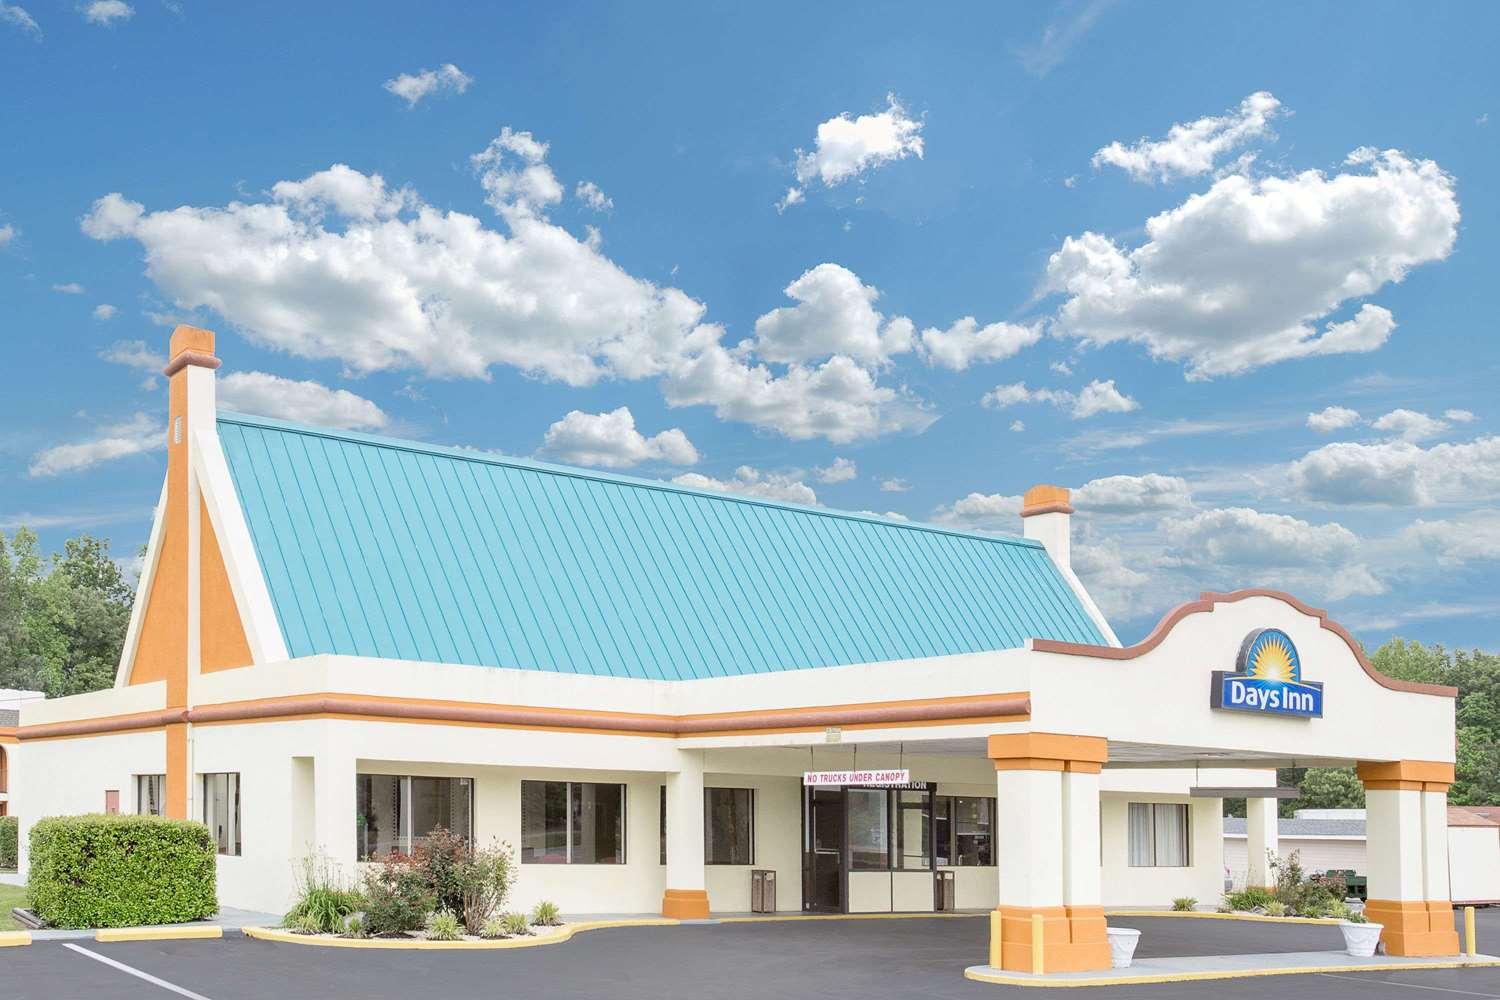 Days Inn by Wyndham Ruther Glen Kings Dominion Area in Ruther Glen, VA